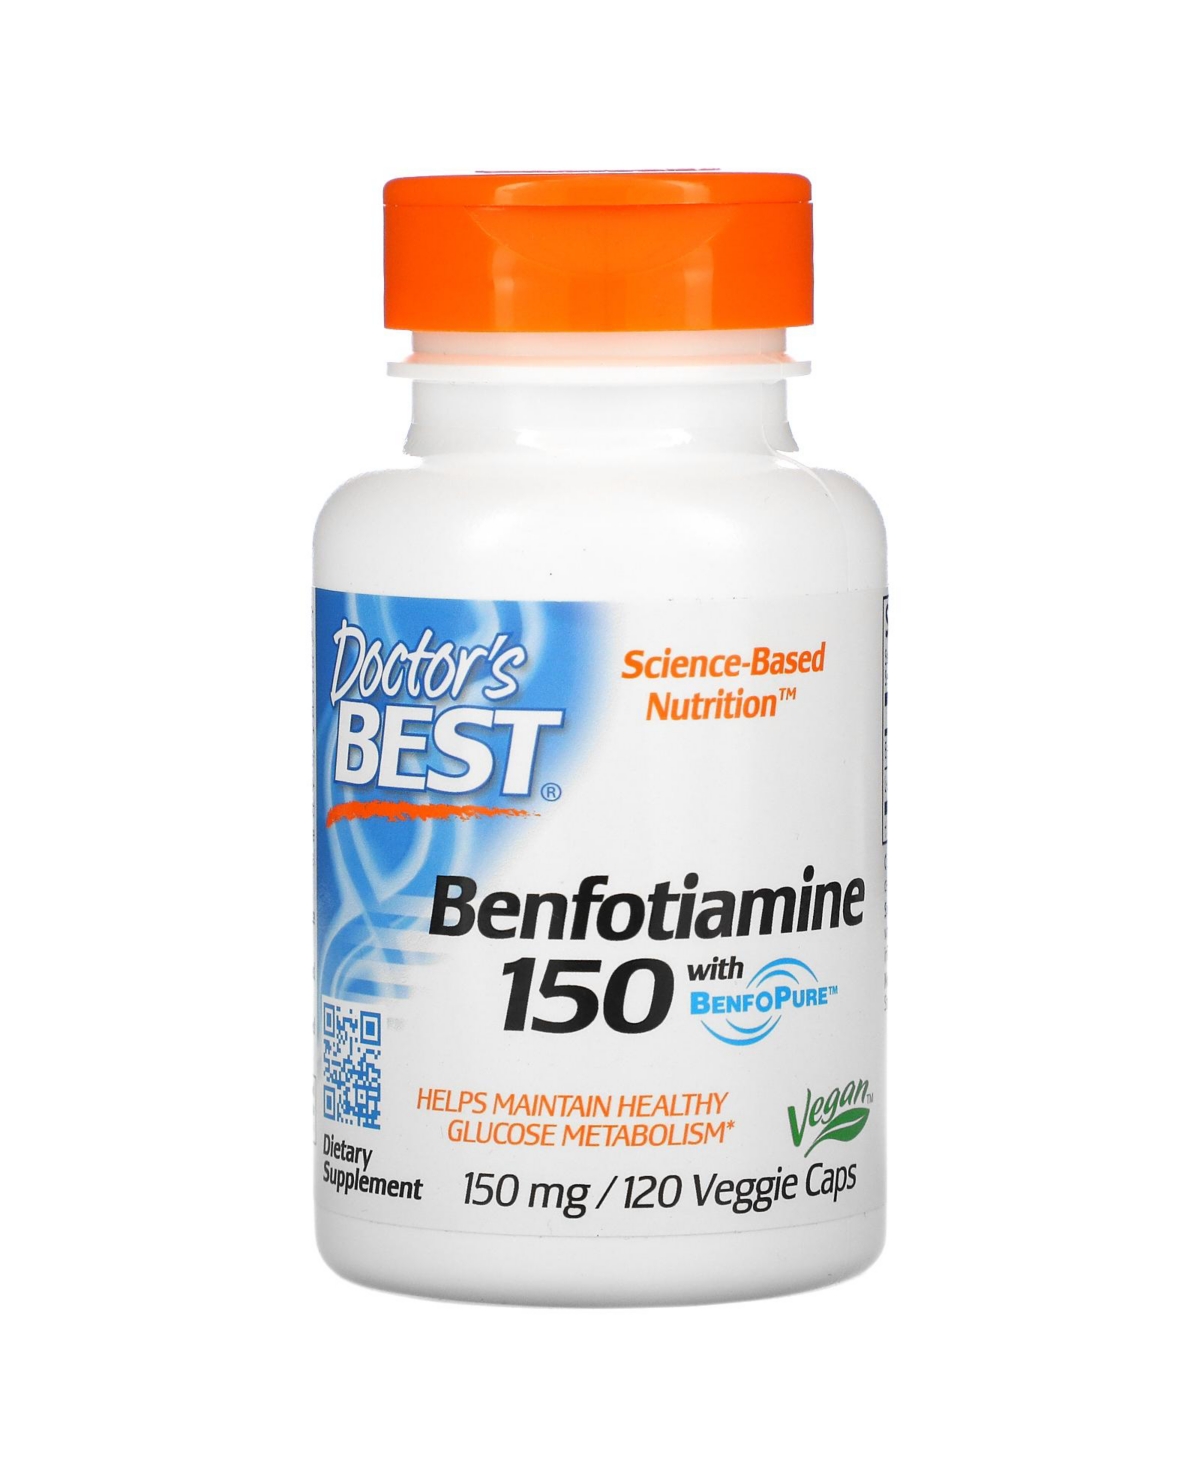 Benfotiamine 150 with BenfoPure 150 mg - 120 Veggie Caps - Assorted Pre-pack (See Table